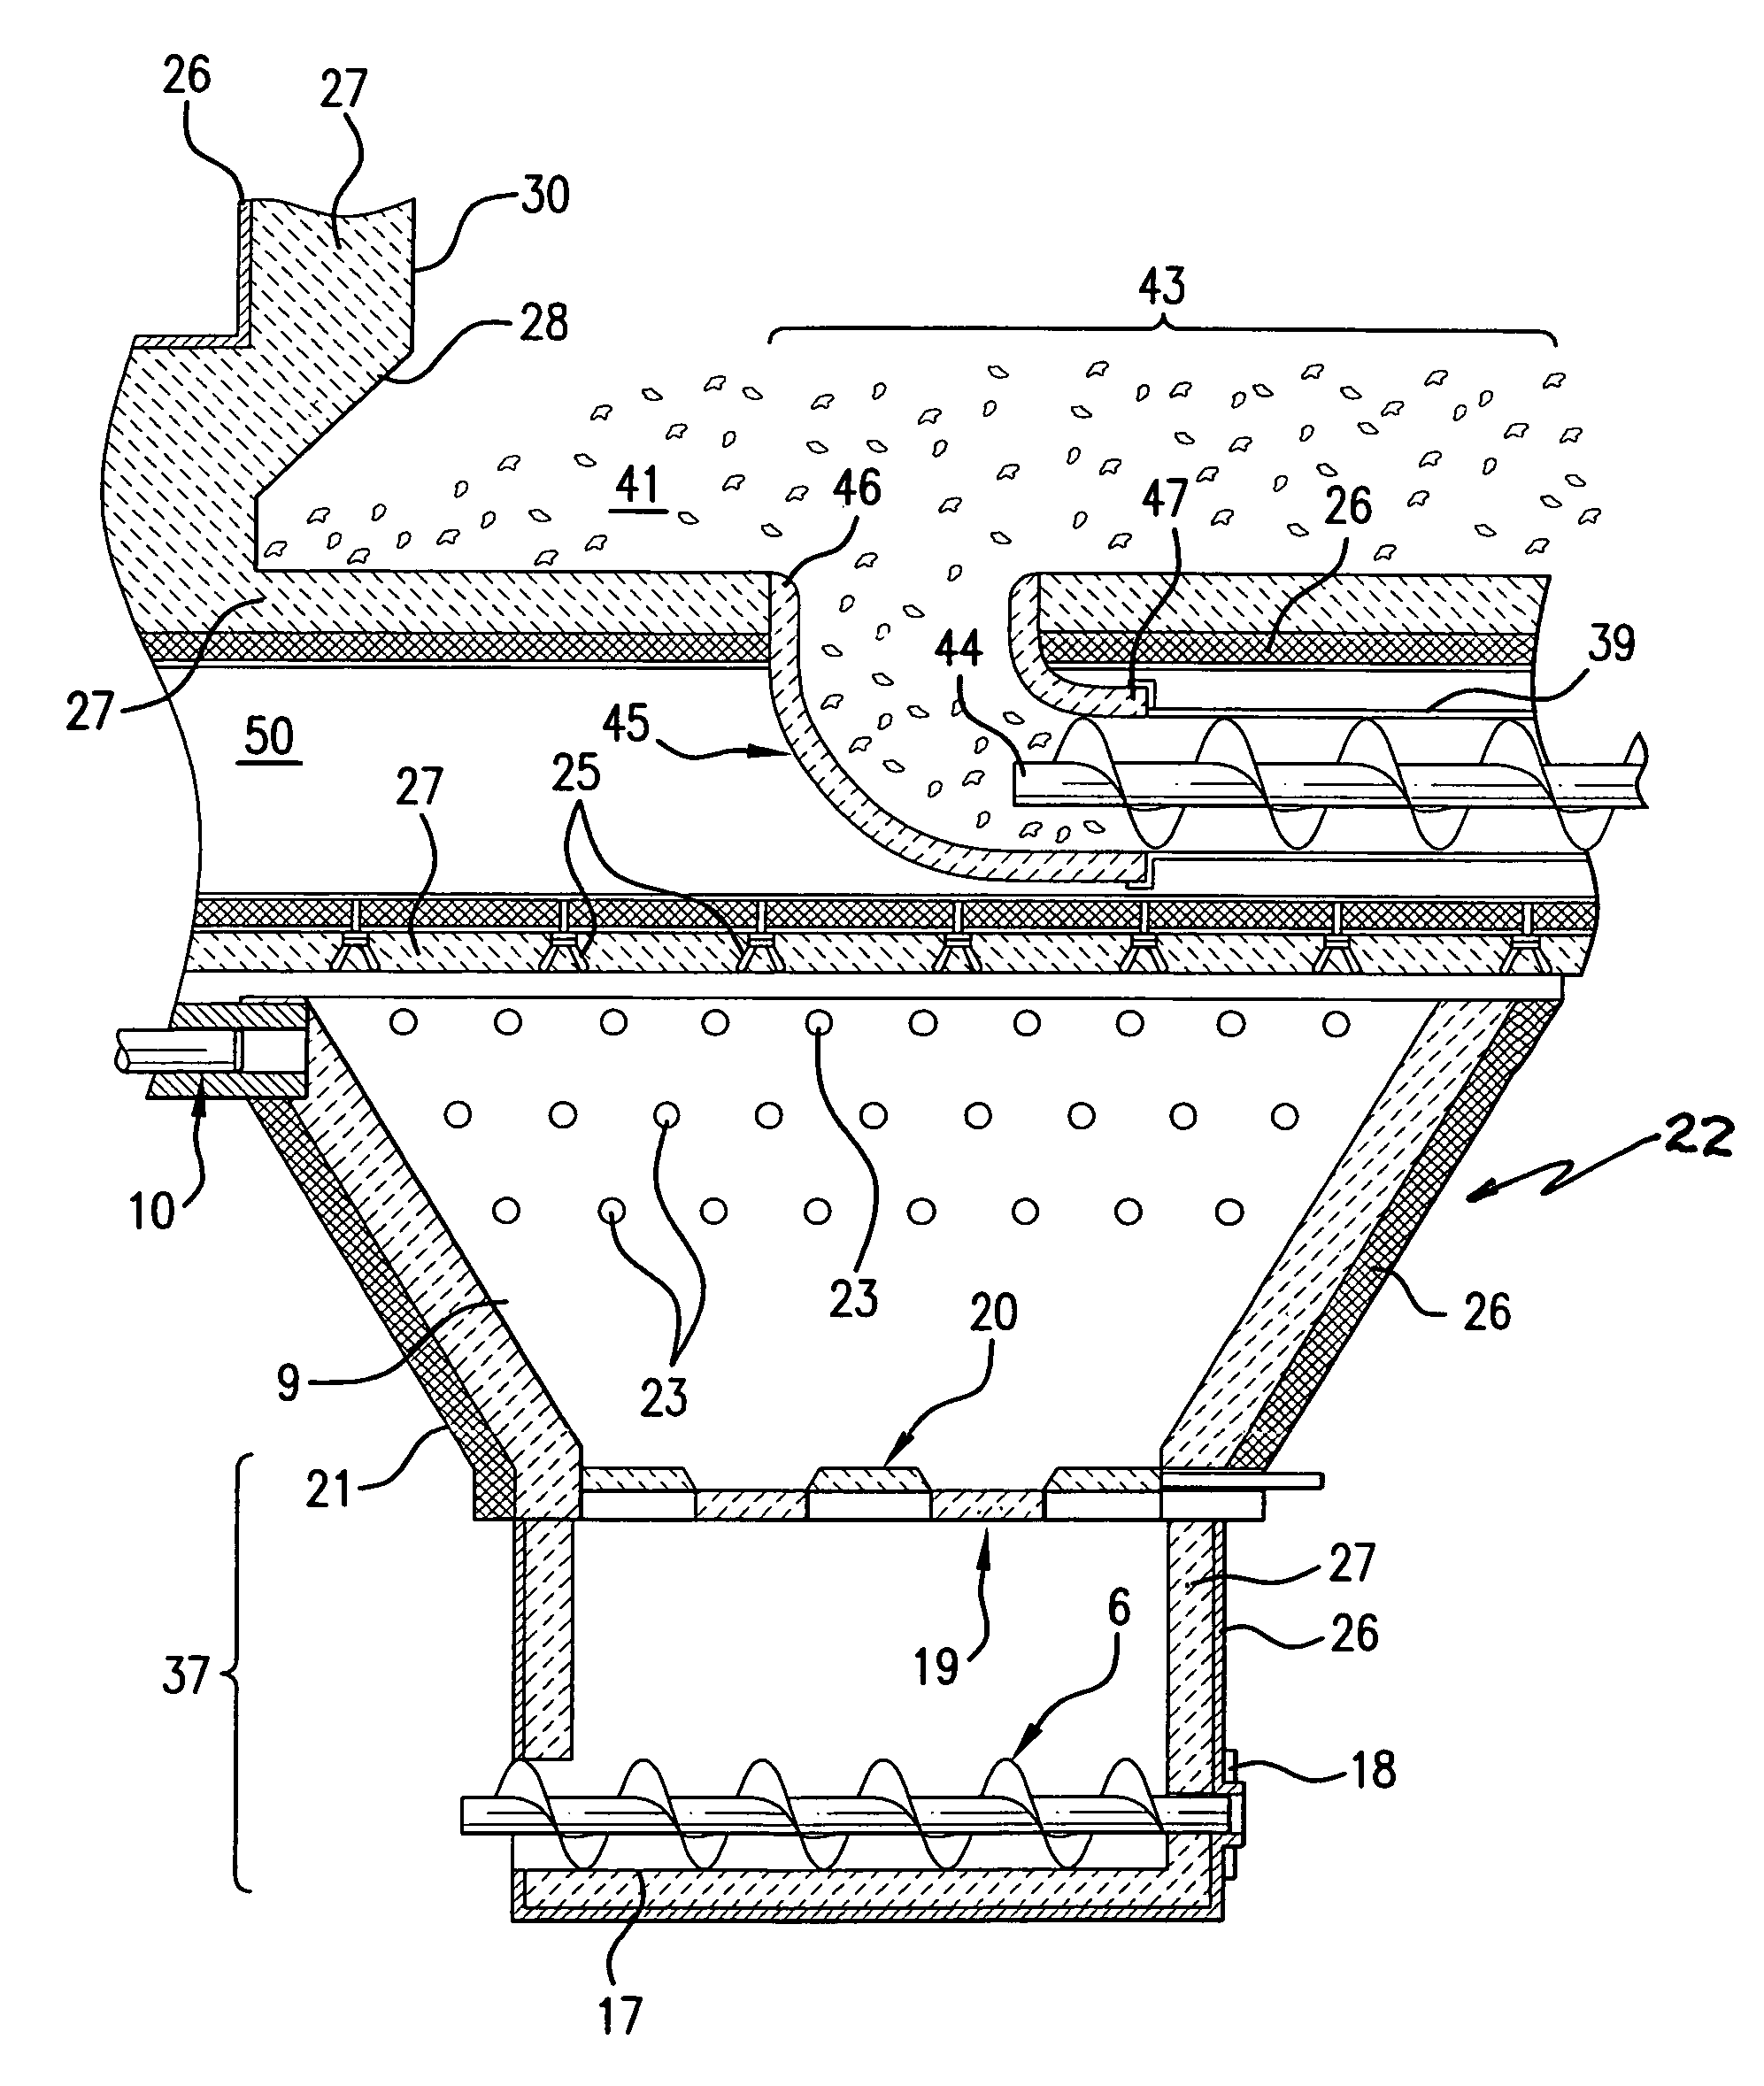 Gasifier and gasifier system for pyrolizing organic materials